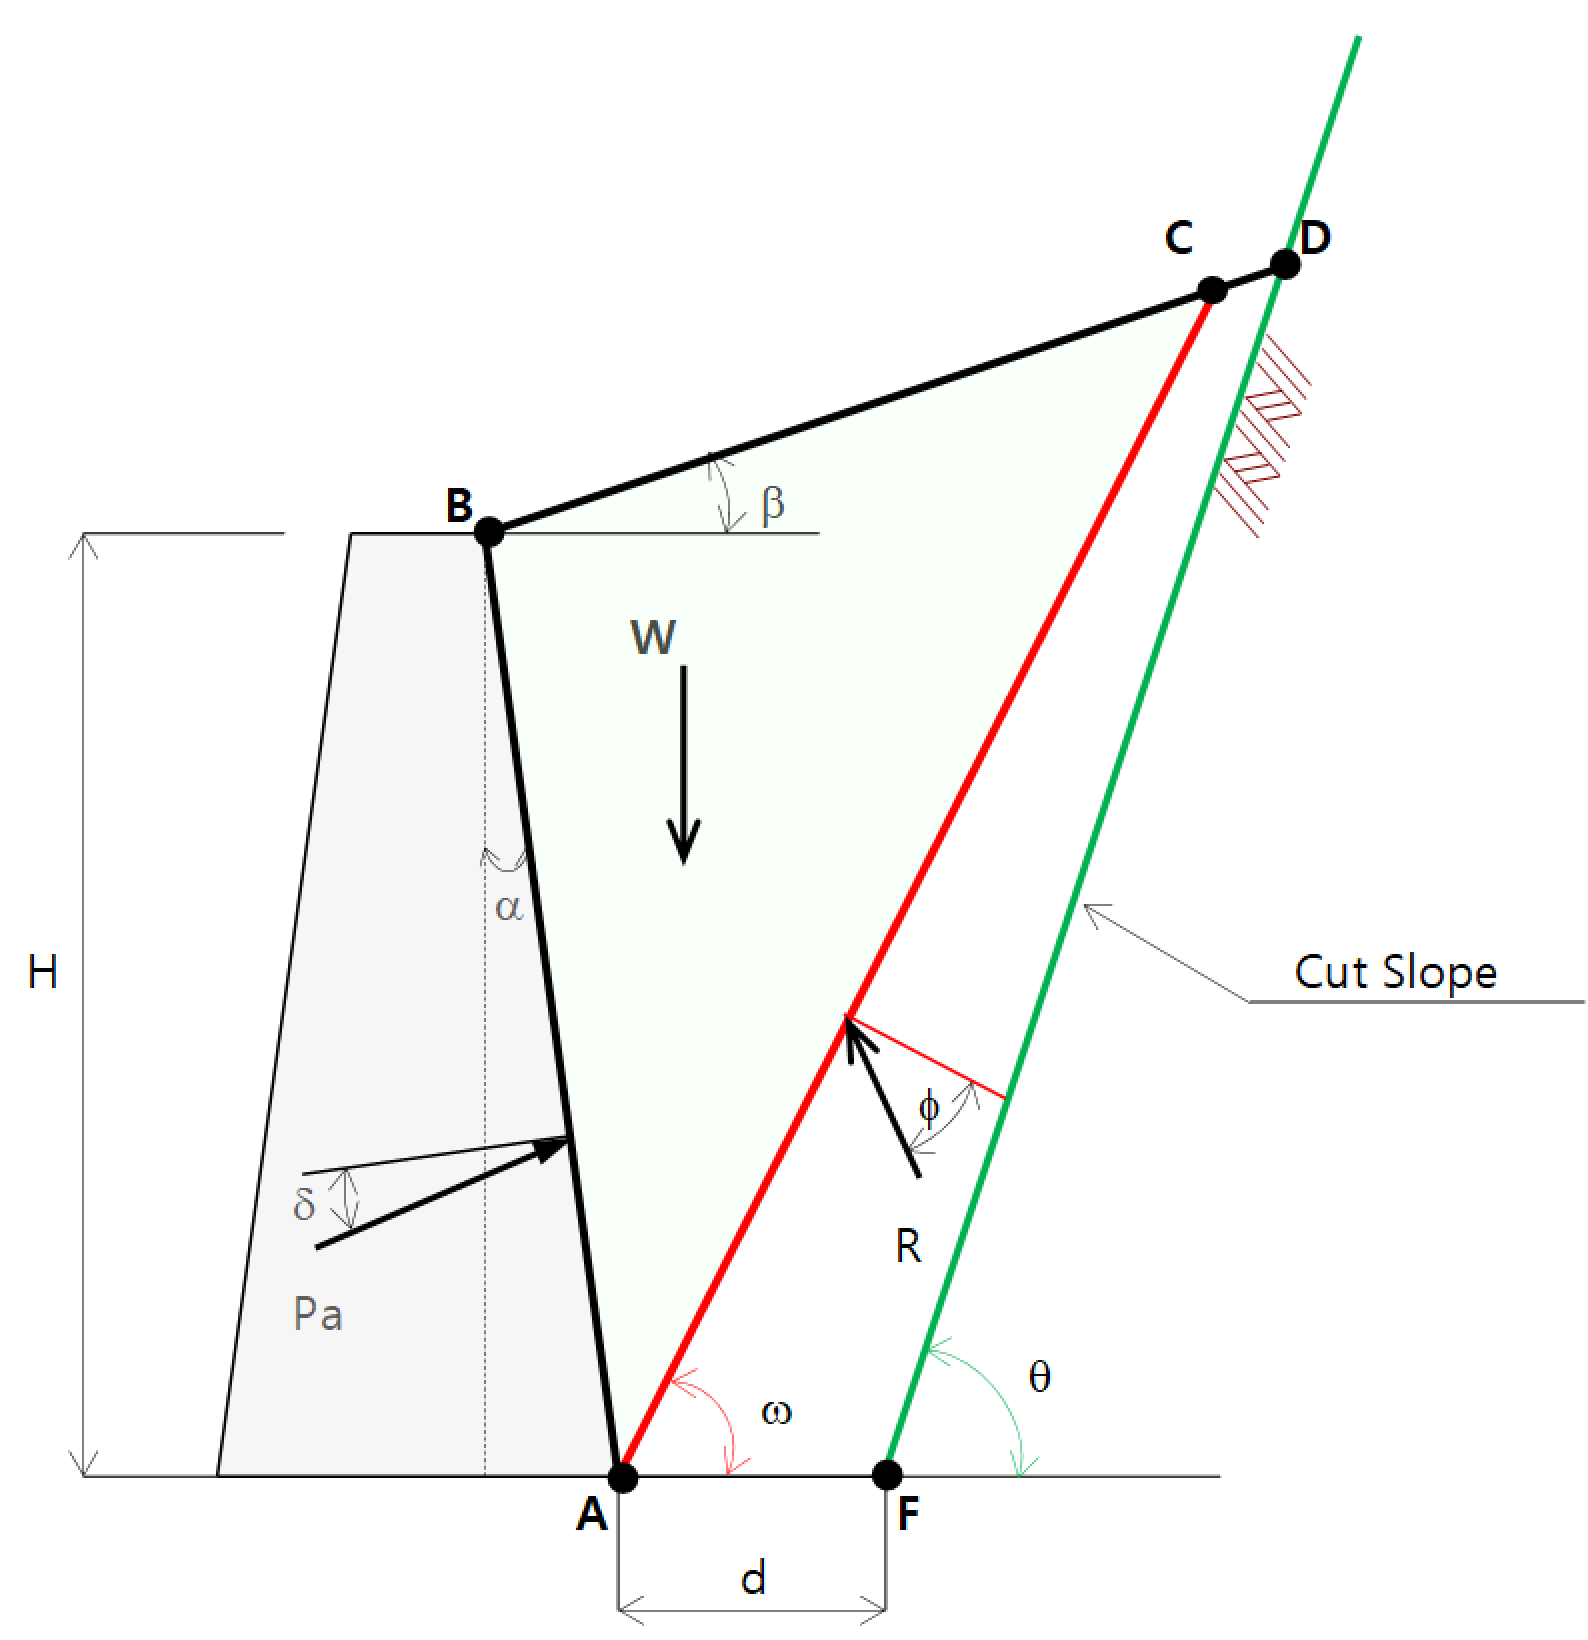 If the failure angle of the wedge is greater than or equal to DAF